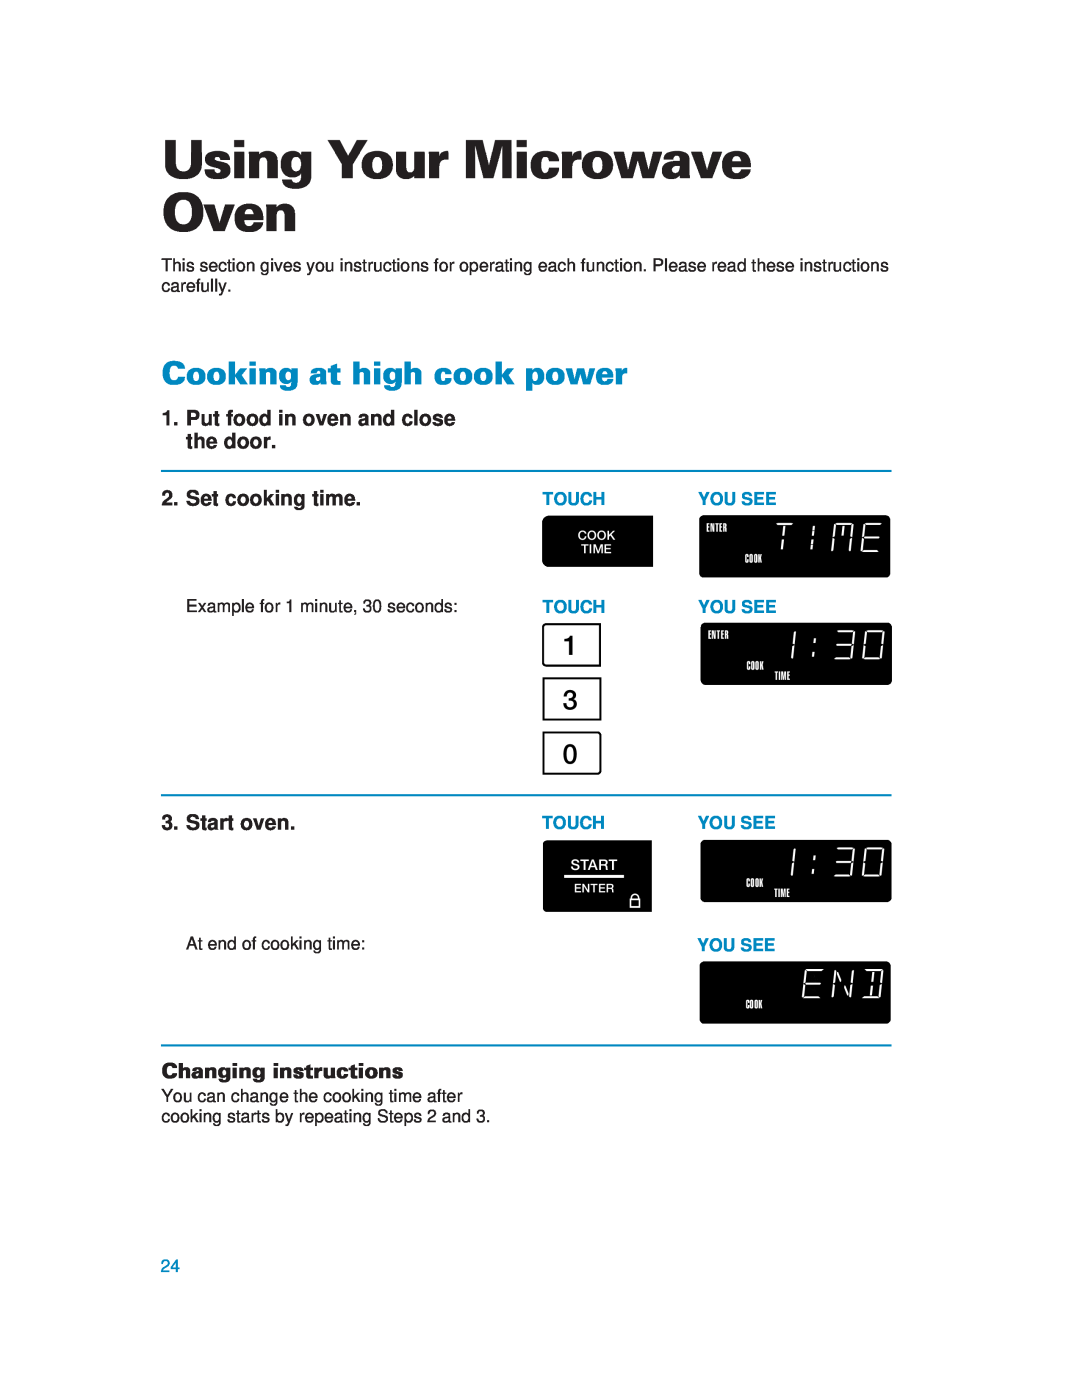 Whirlpool MH6130XE Using Your Microwave Oven, Cooking at high cook power, Put food in oven and close the door, Start oven 